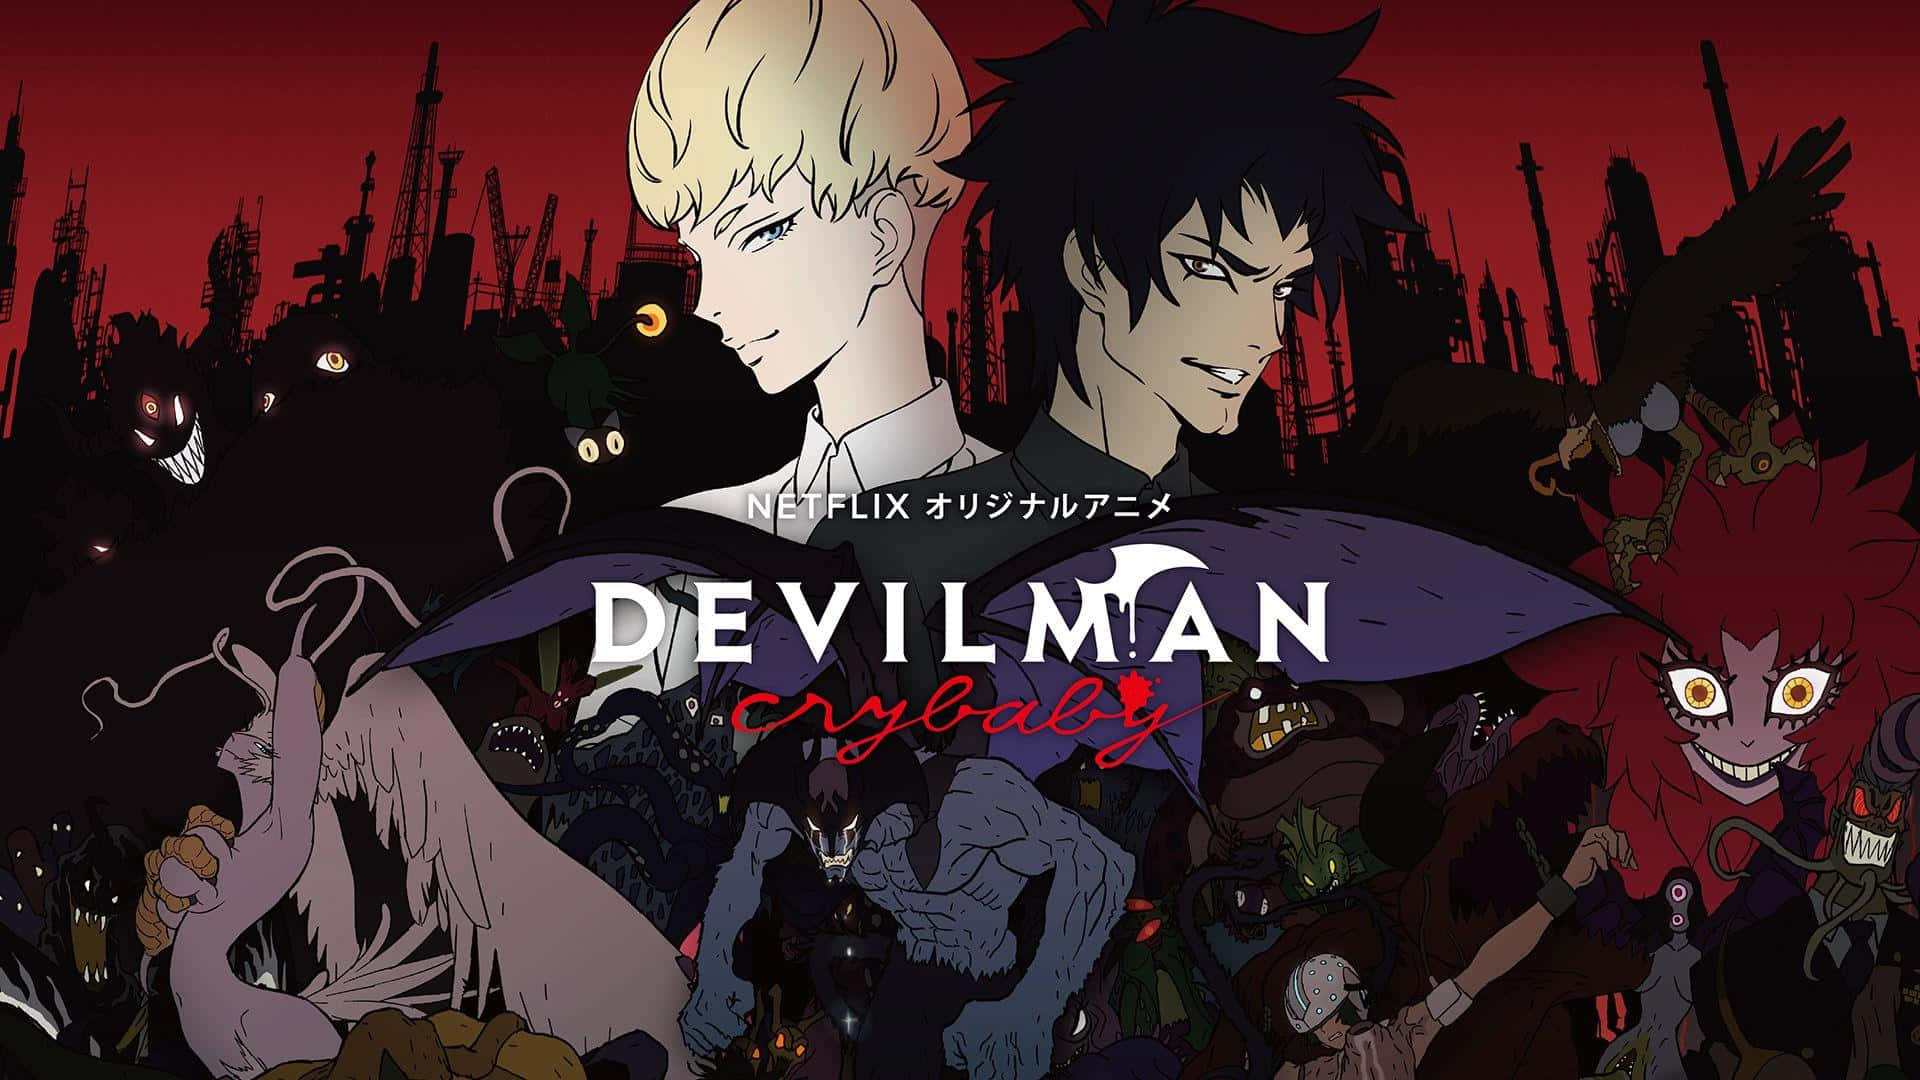 Akira Fudo, the protagonist of the popular anime series Devilman Crybaby, stands ready to face his latest demons.